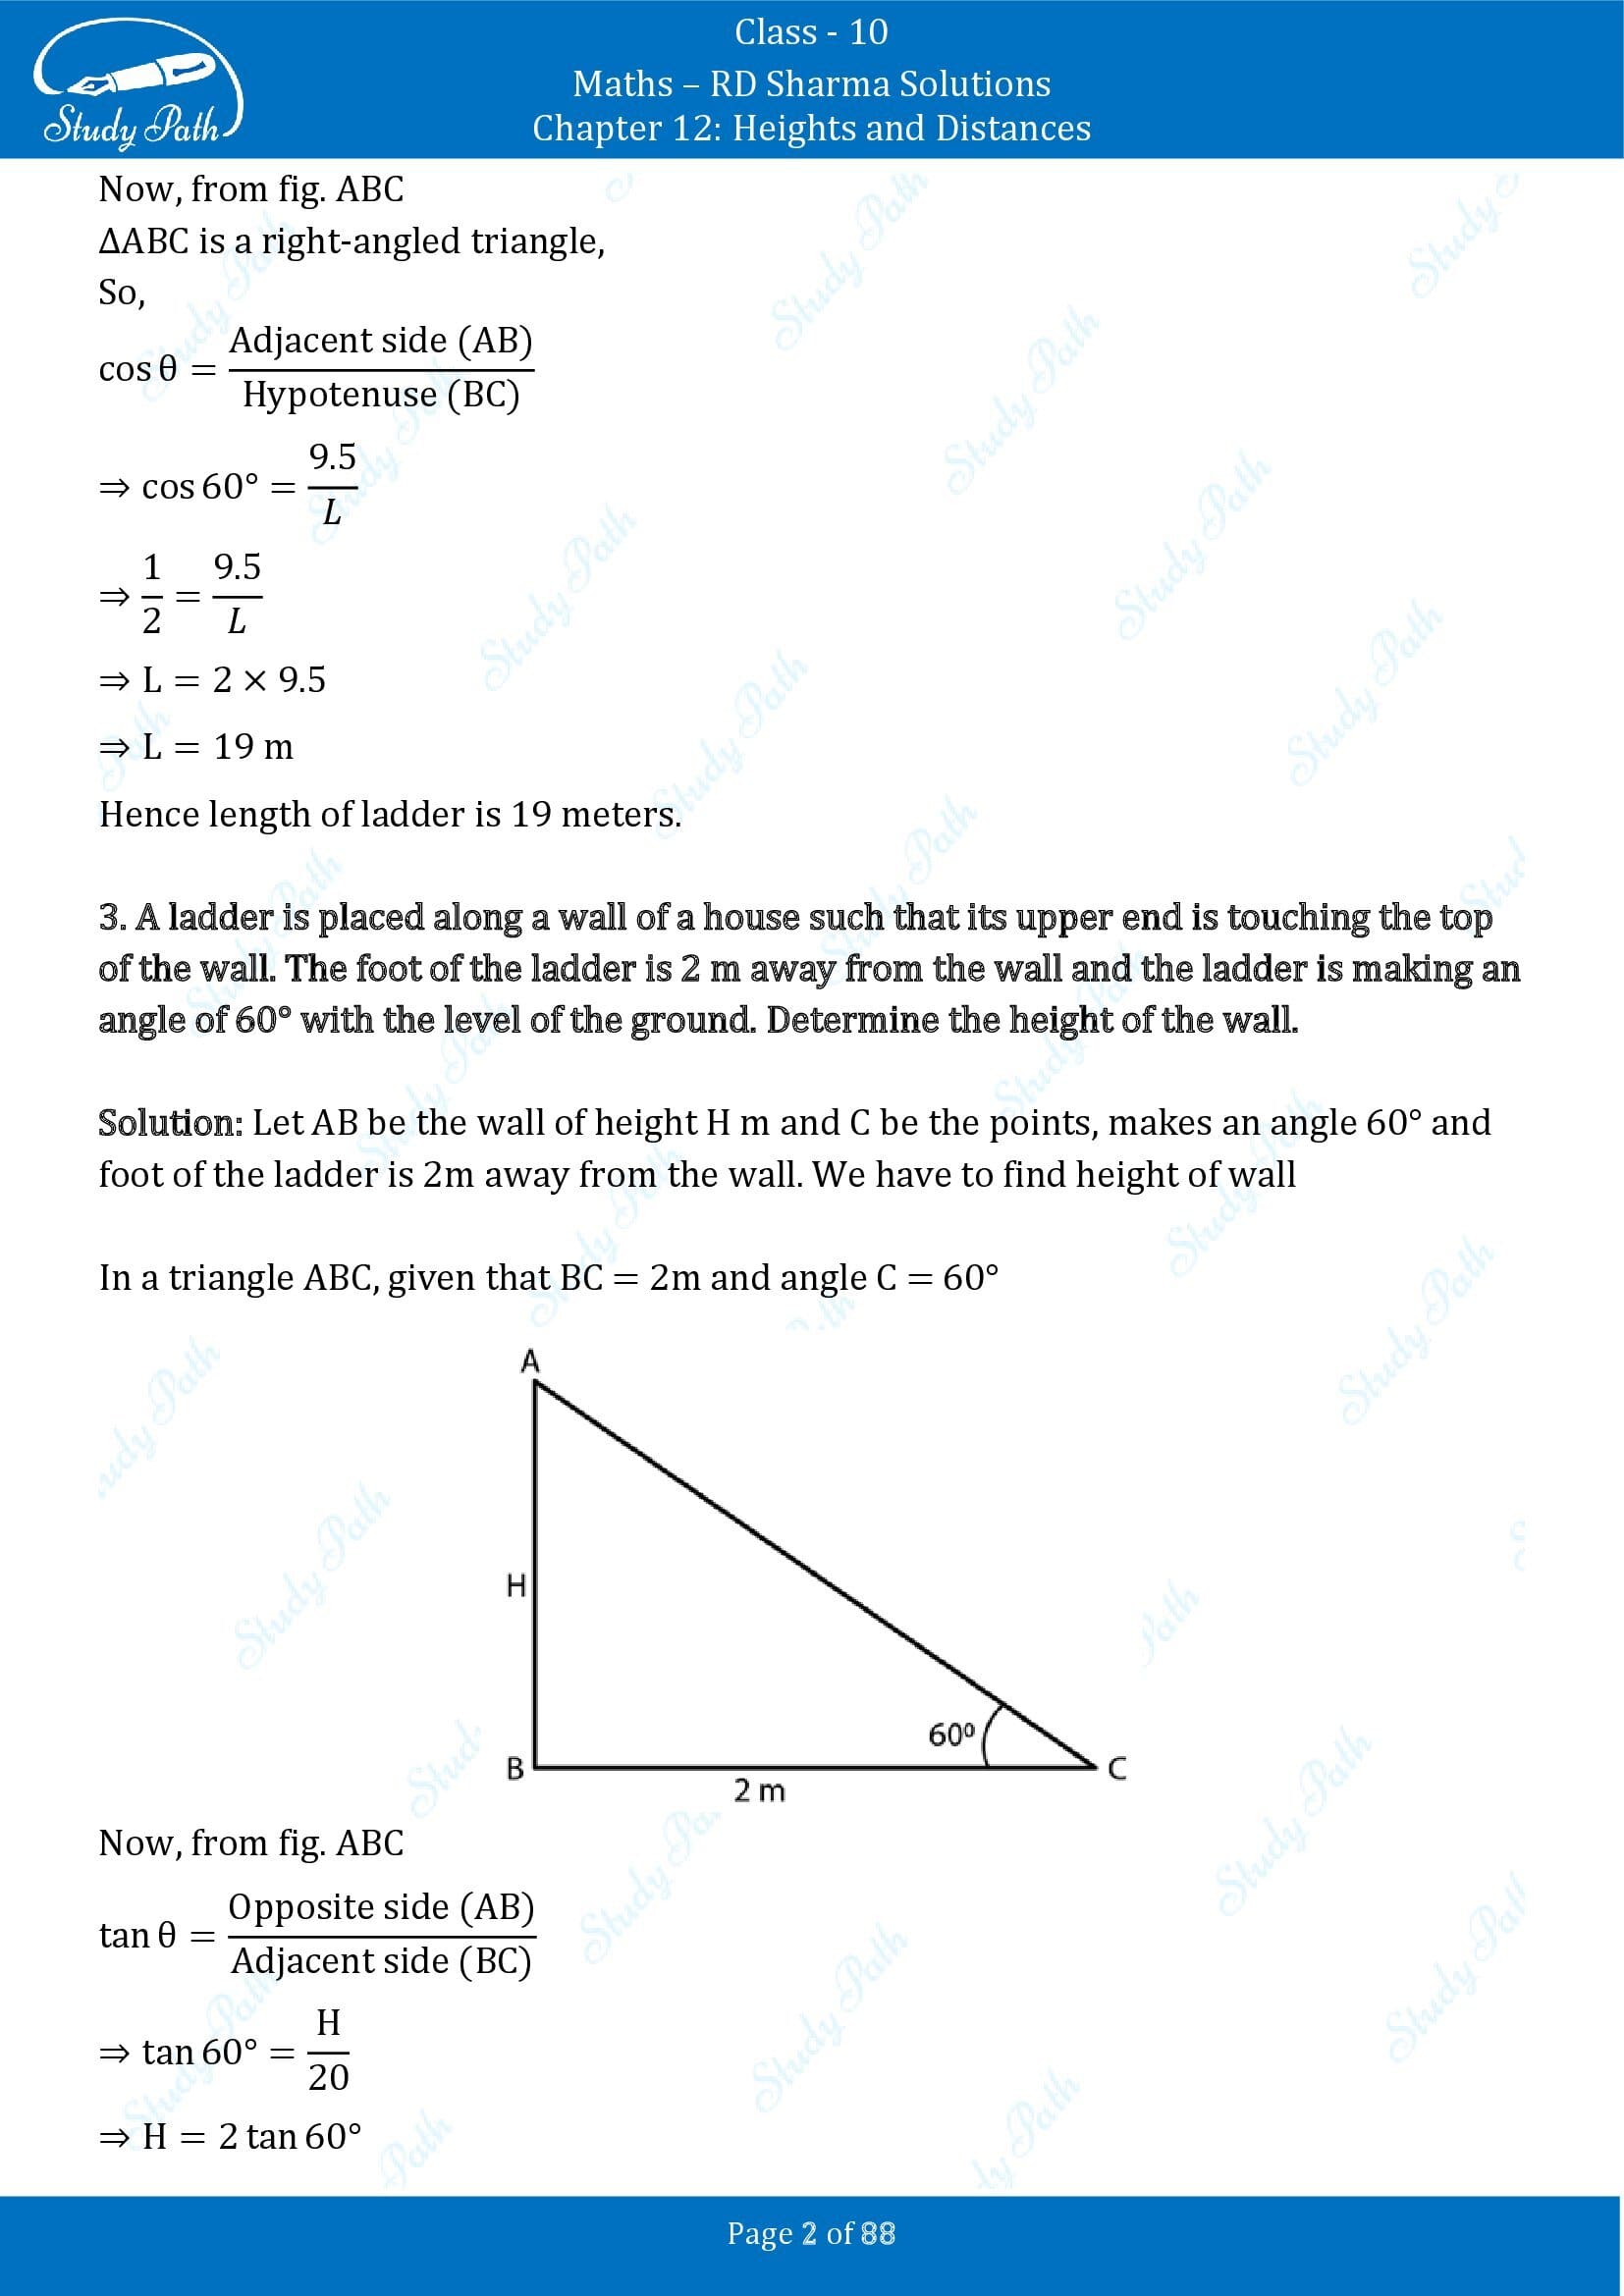 RD Sharma Solutions Class 10 Chapter 12 Heights and Distances Exercise 12.1 00002